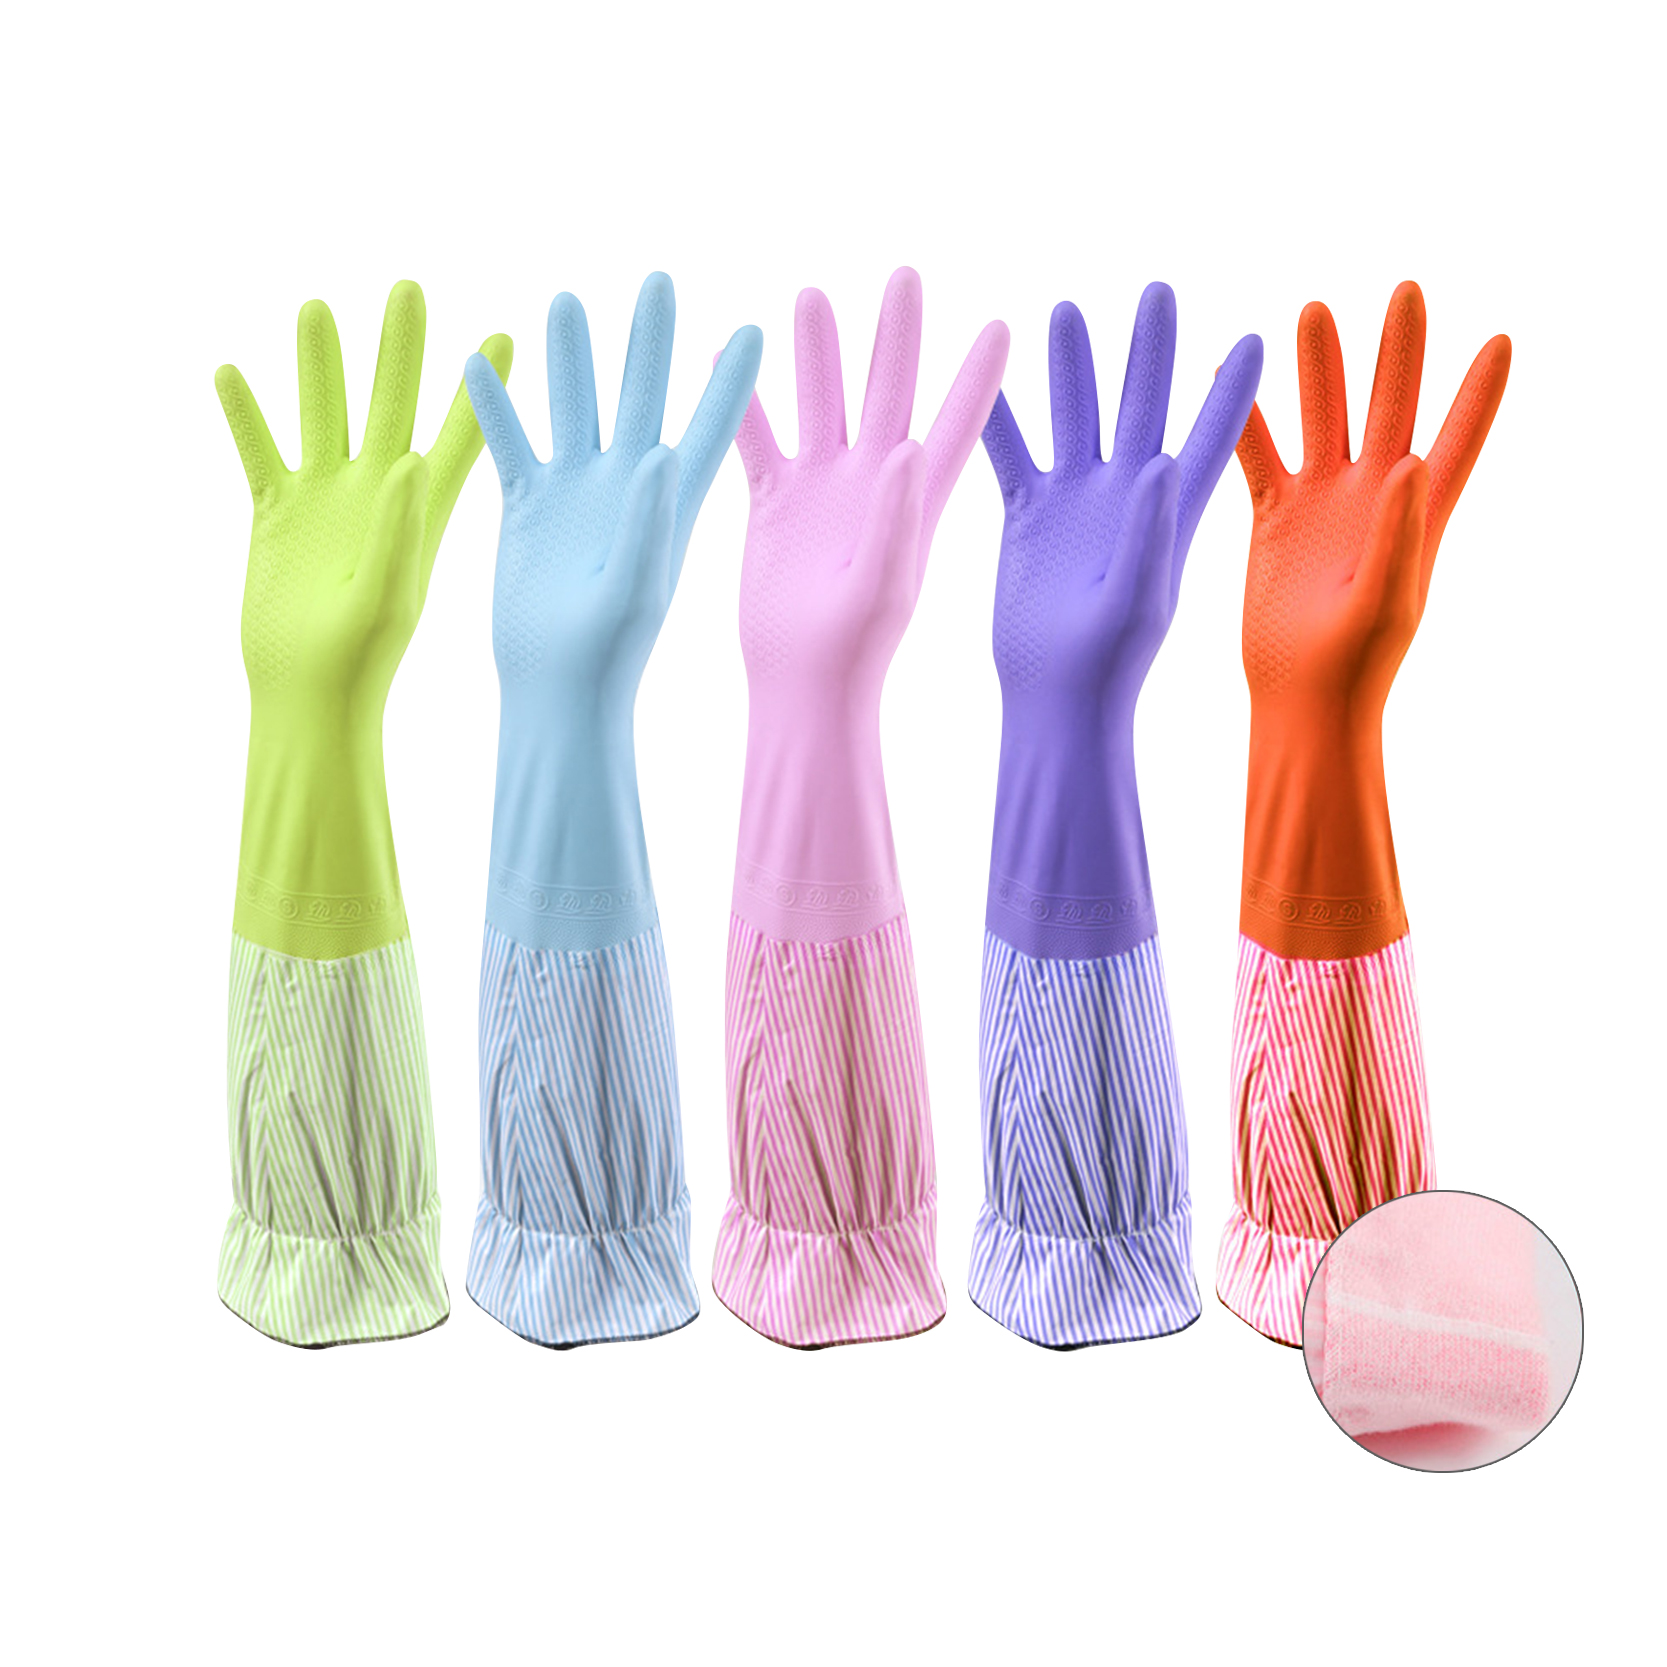 Purgamentum Latex Gloves Tersus Long Gloves Hiems Operis Safety Gloves Mulier Clean Tool IMPERVIUS Dishwashing Household